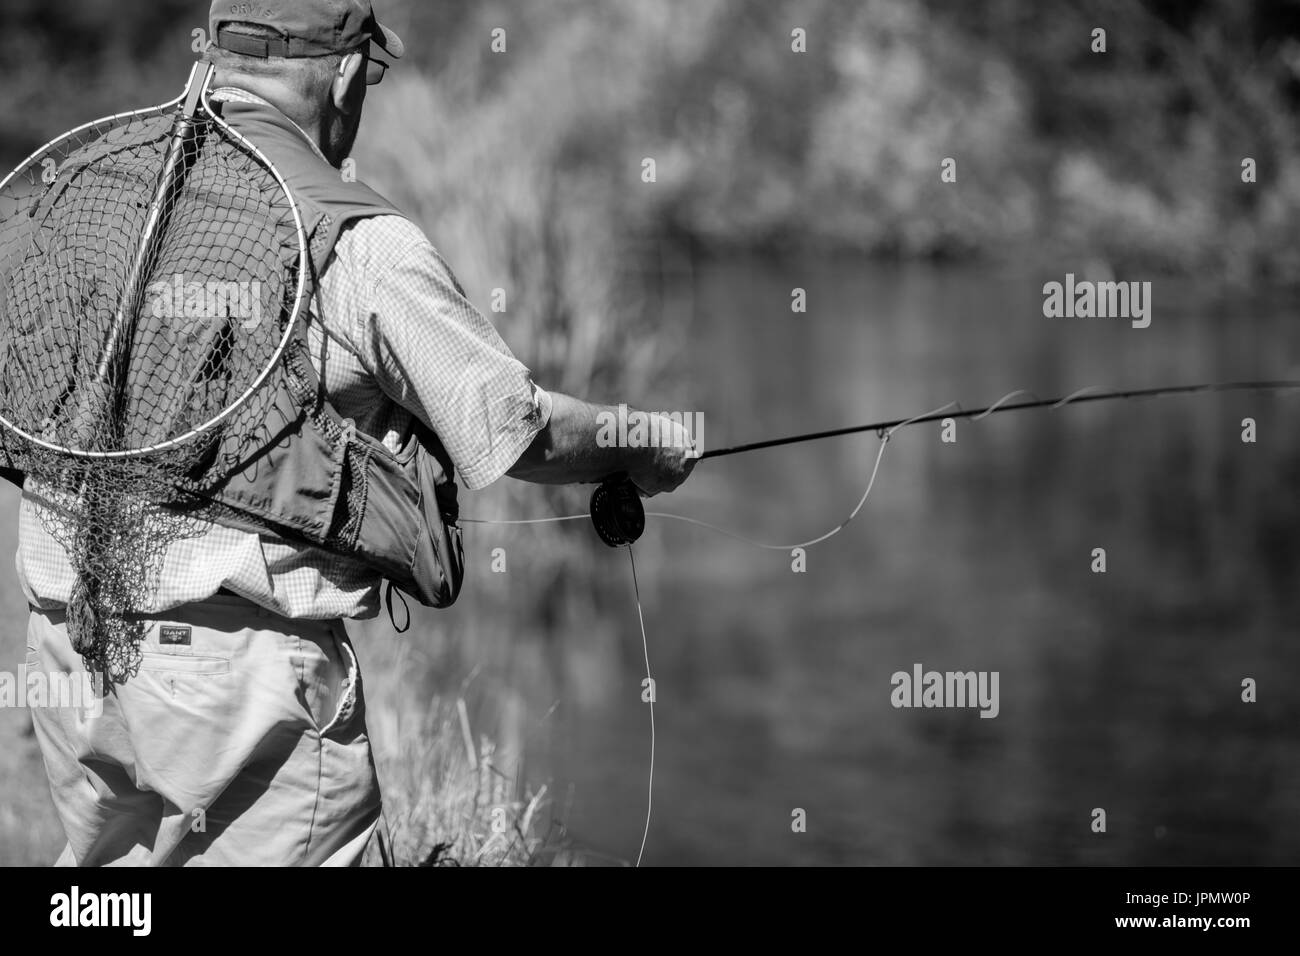 Fisherman reel Black and White Stock Photos & Images - Alamy